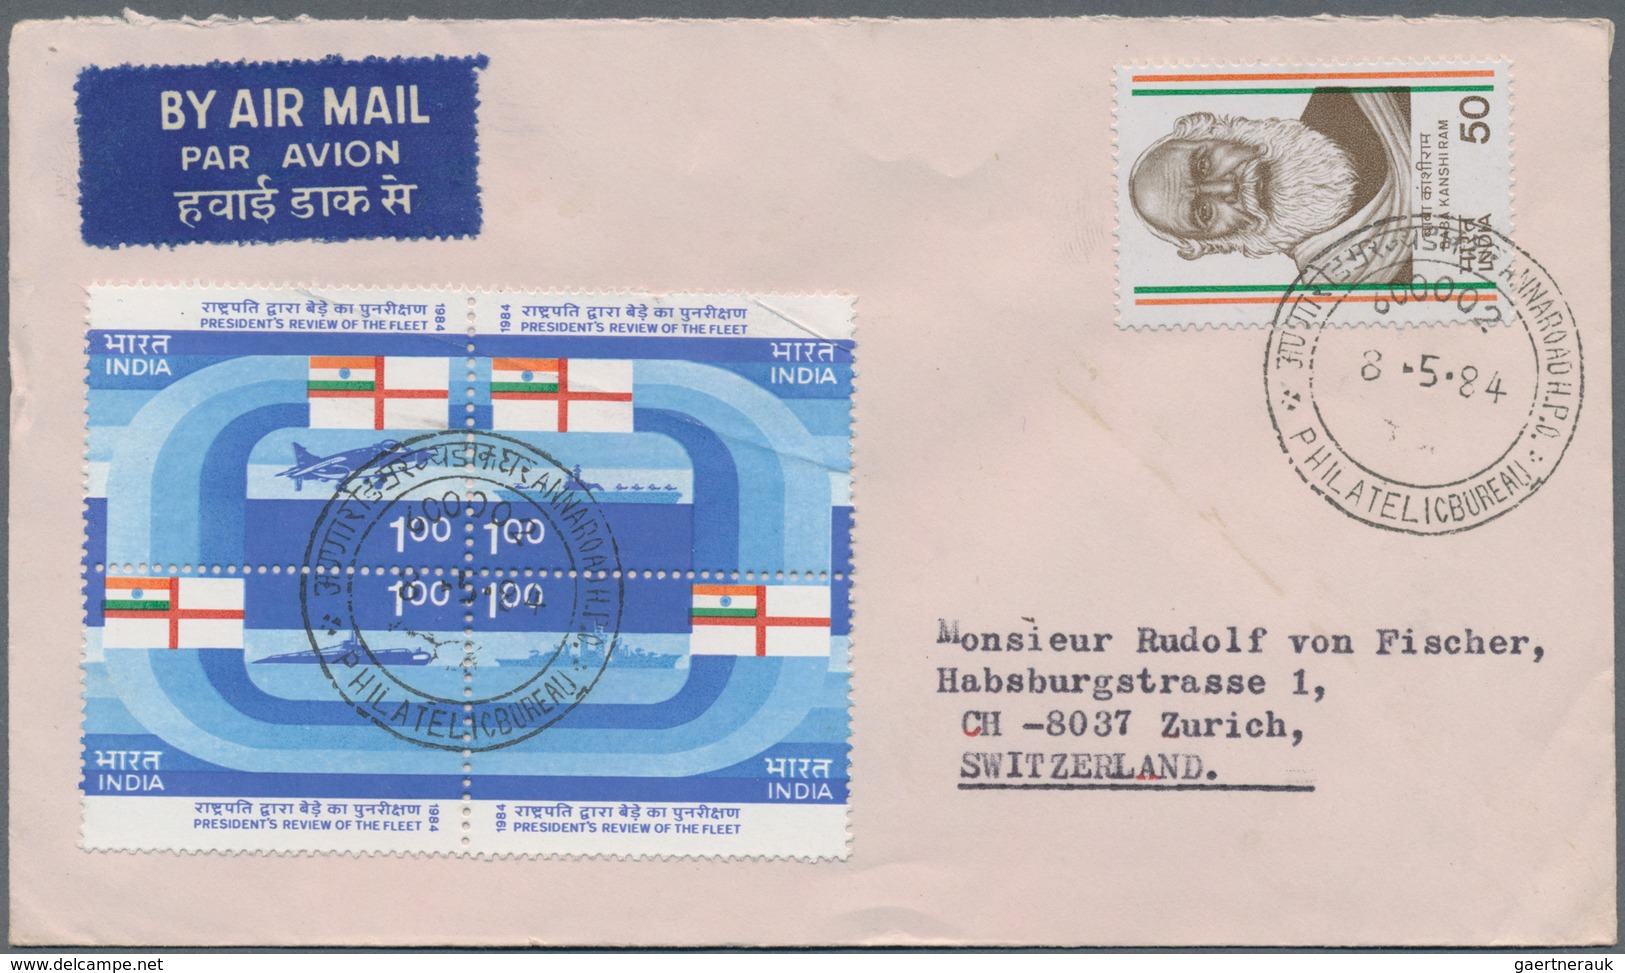 Indien: 1970's-1990's: About 120 Covers, Postcards And FDCs, Many Sent To Europe, With Some Good Fra - 1854 East India Company Administration